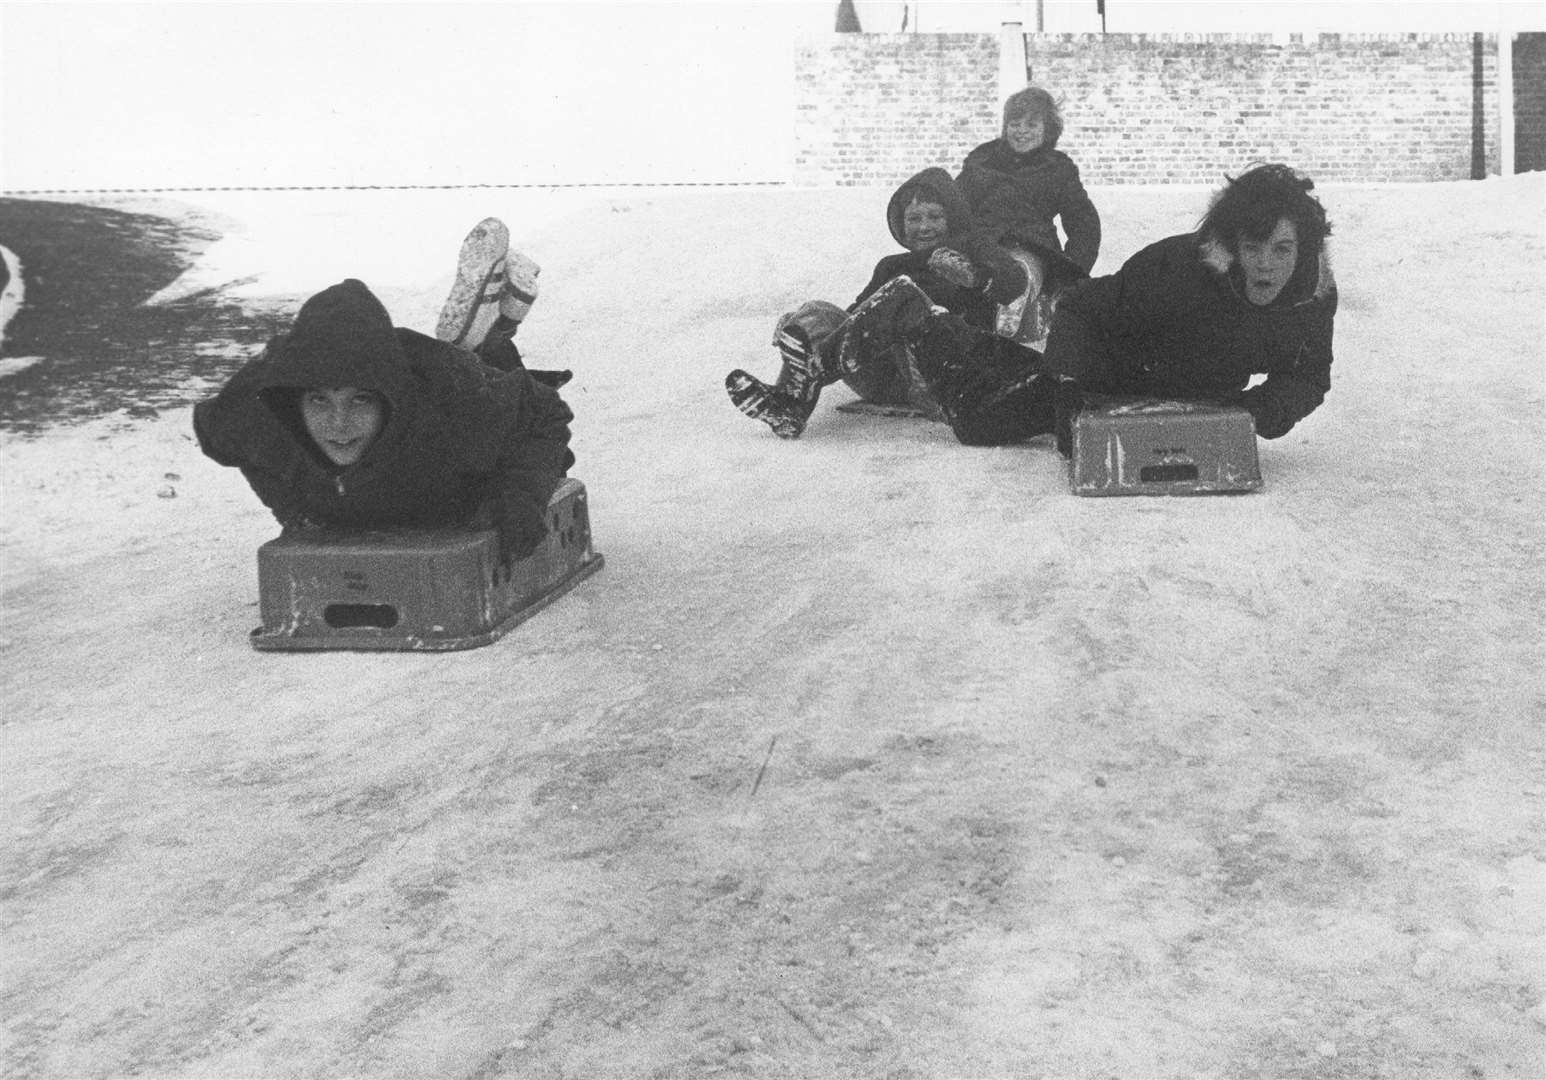 Children enjoying sledging during the cold weather in '79